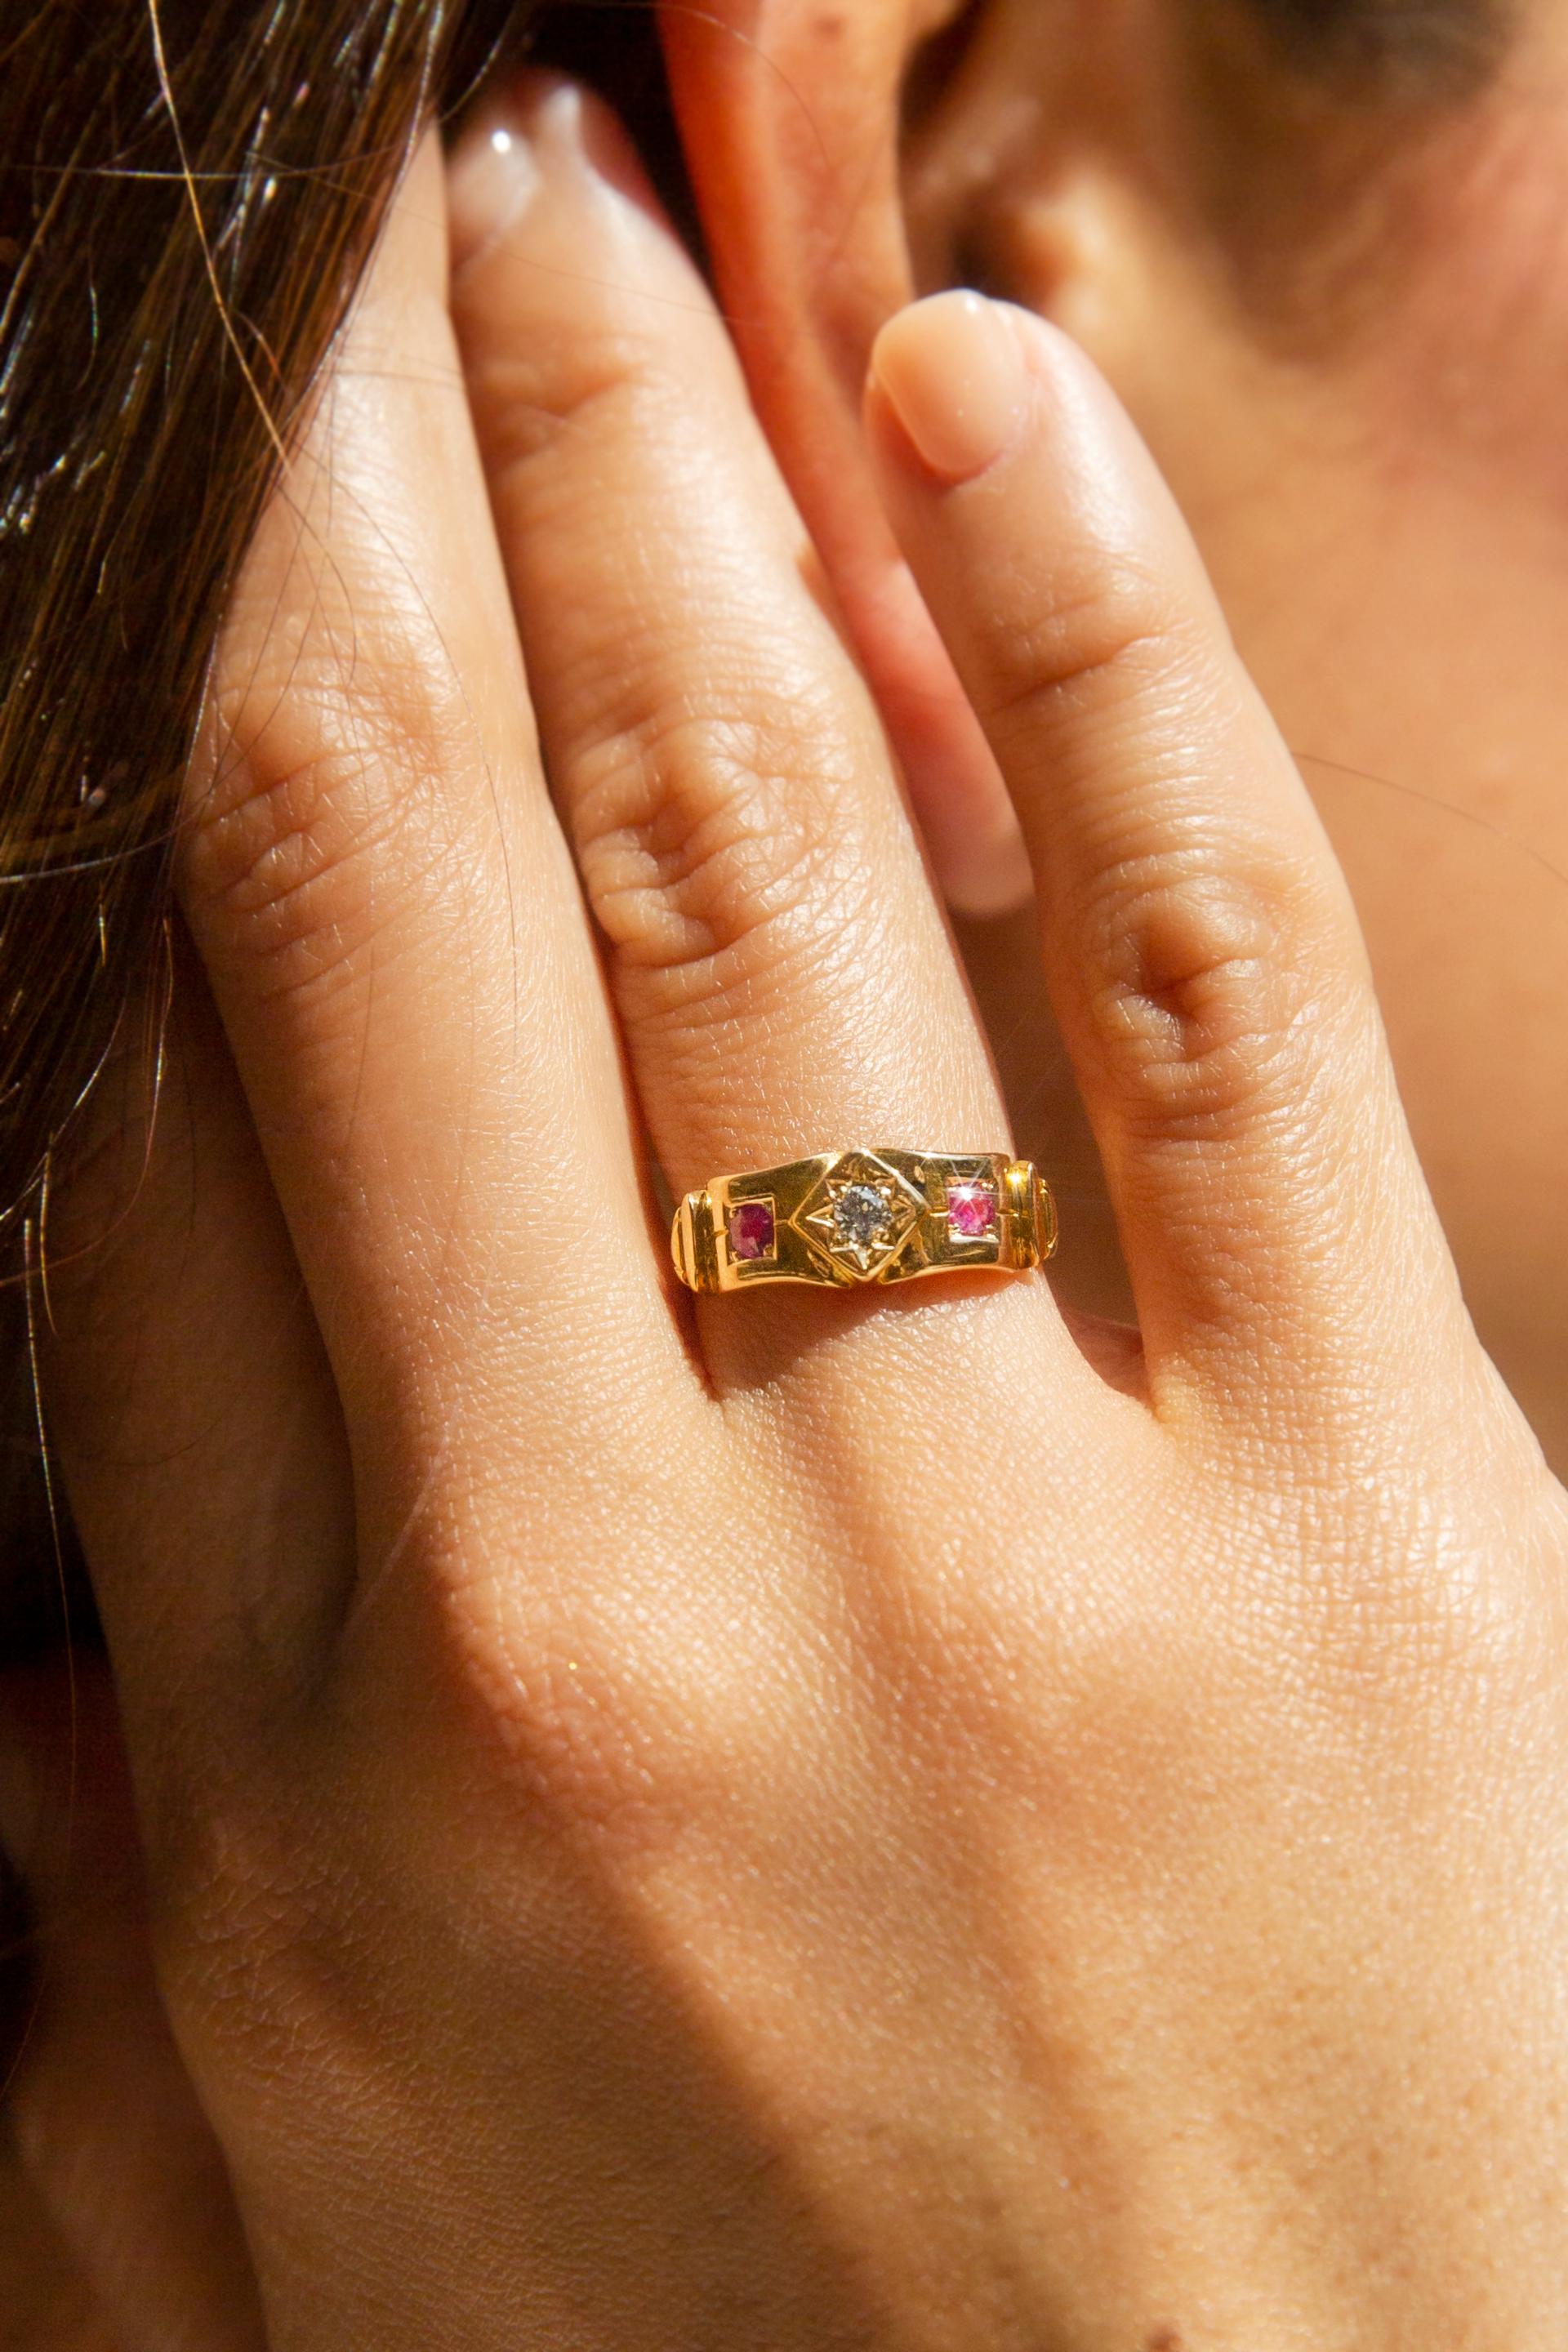 Lovingly crafted in 20 carat gold, The Imelda Ring is an antique treasure. Star set diamonds and crimson rubies in a motif, reminders of a different time and sensibility. A must have for your vintage & antique collection of gems and jewels.

The